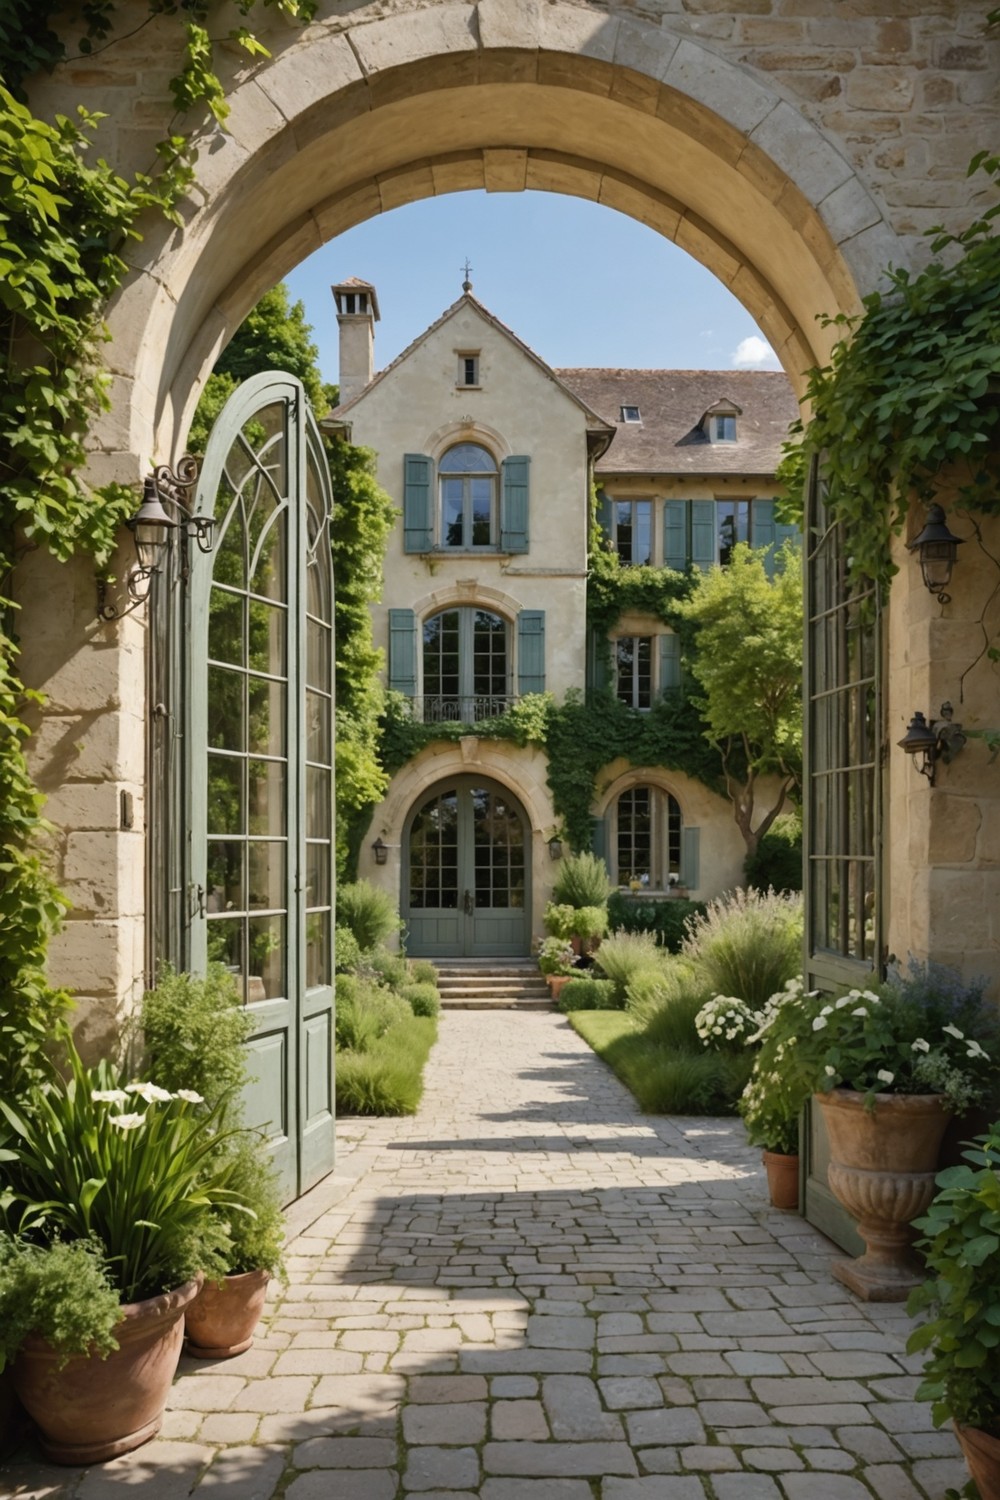 Elegant Arched Windows and Doors